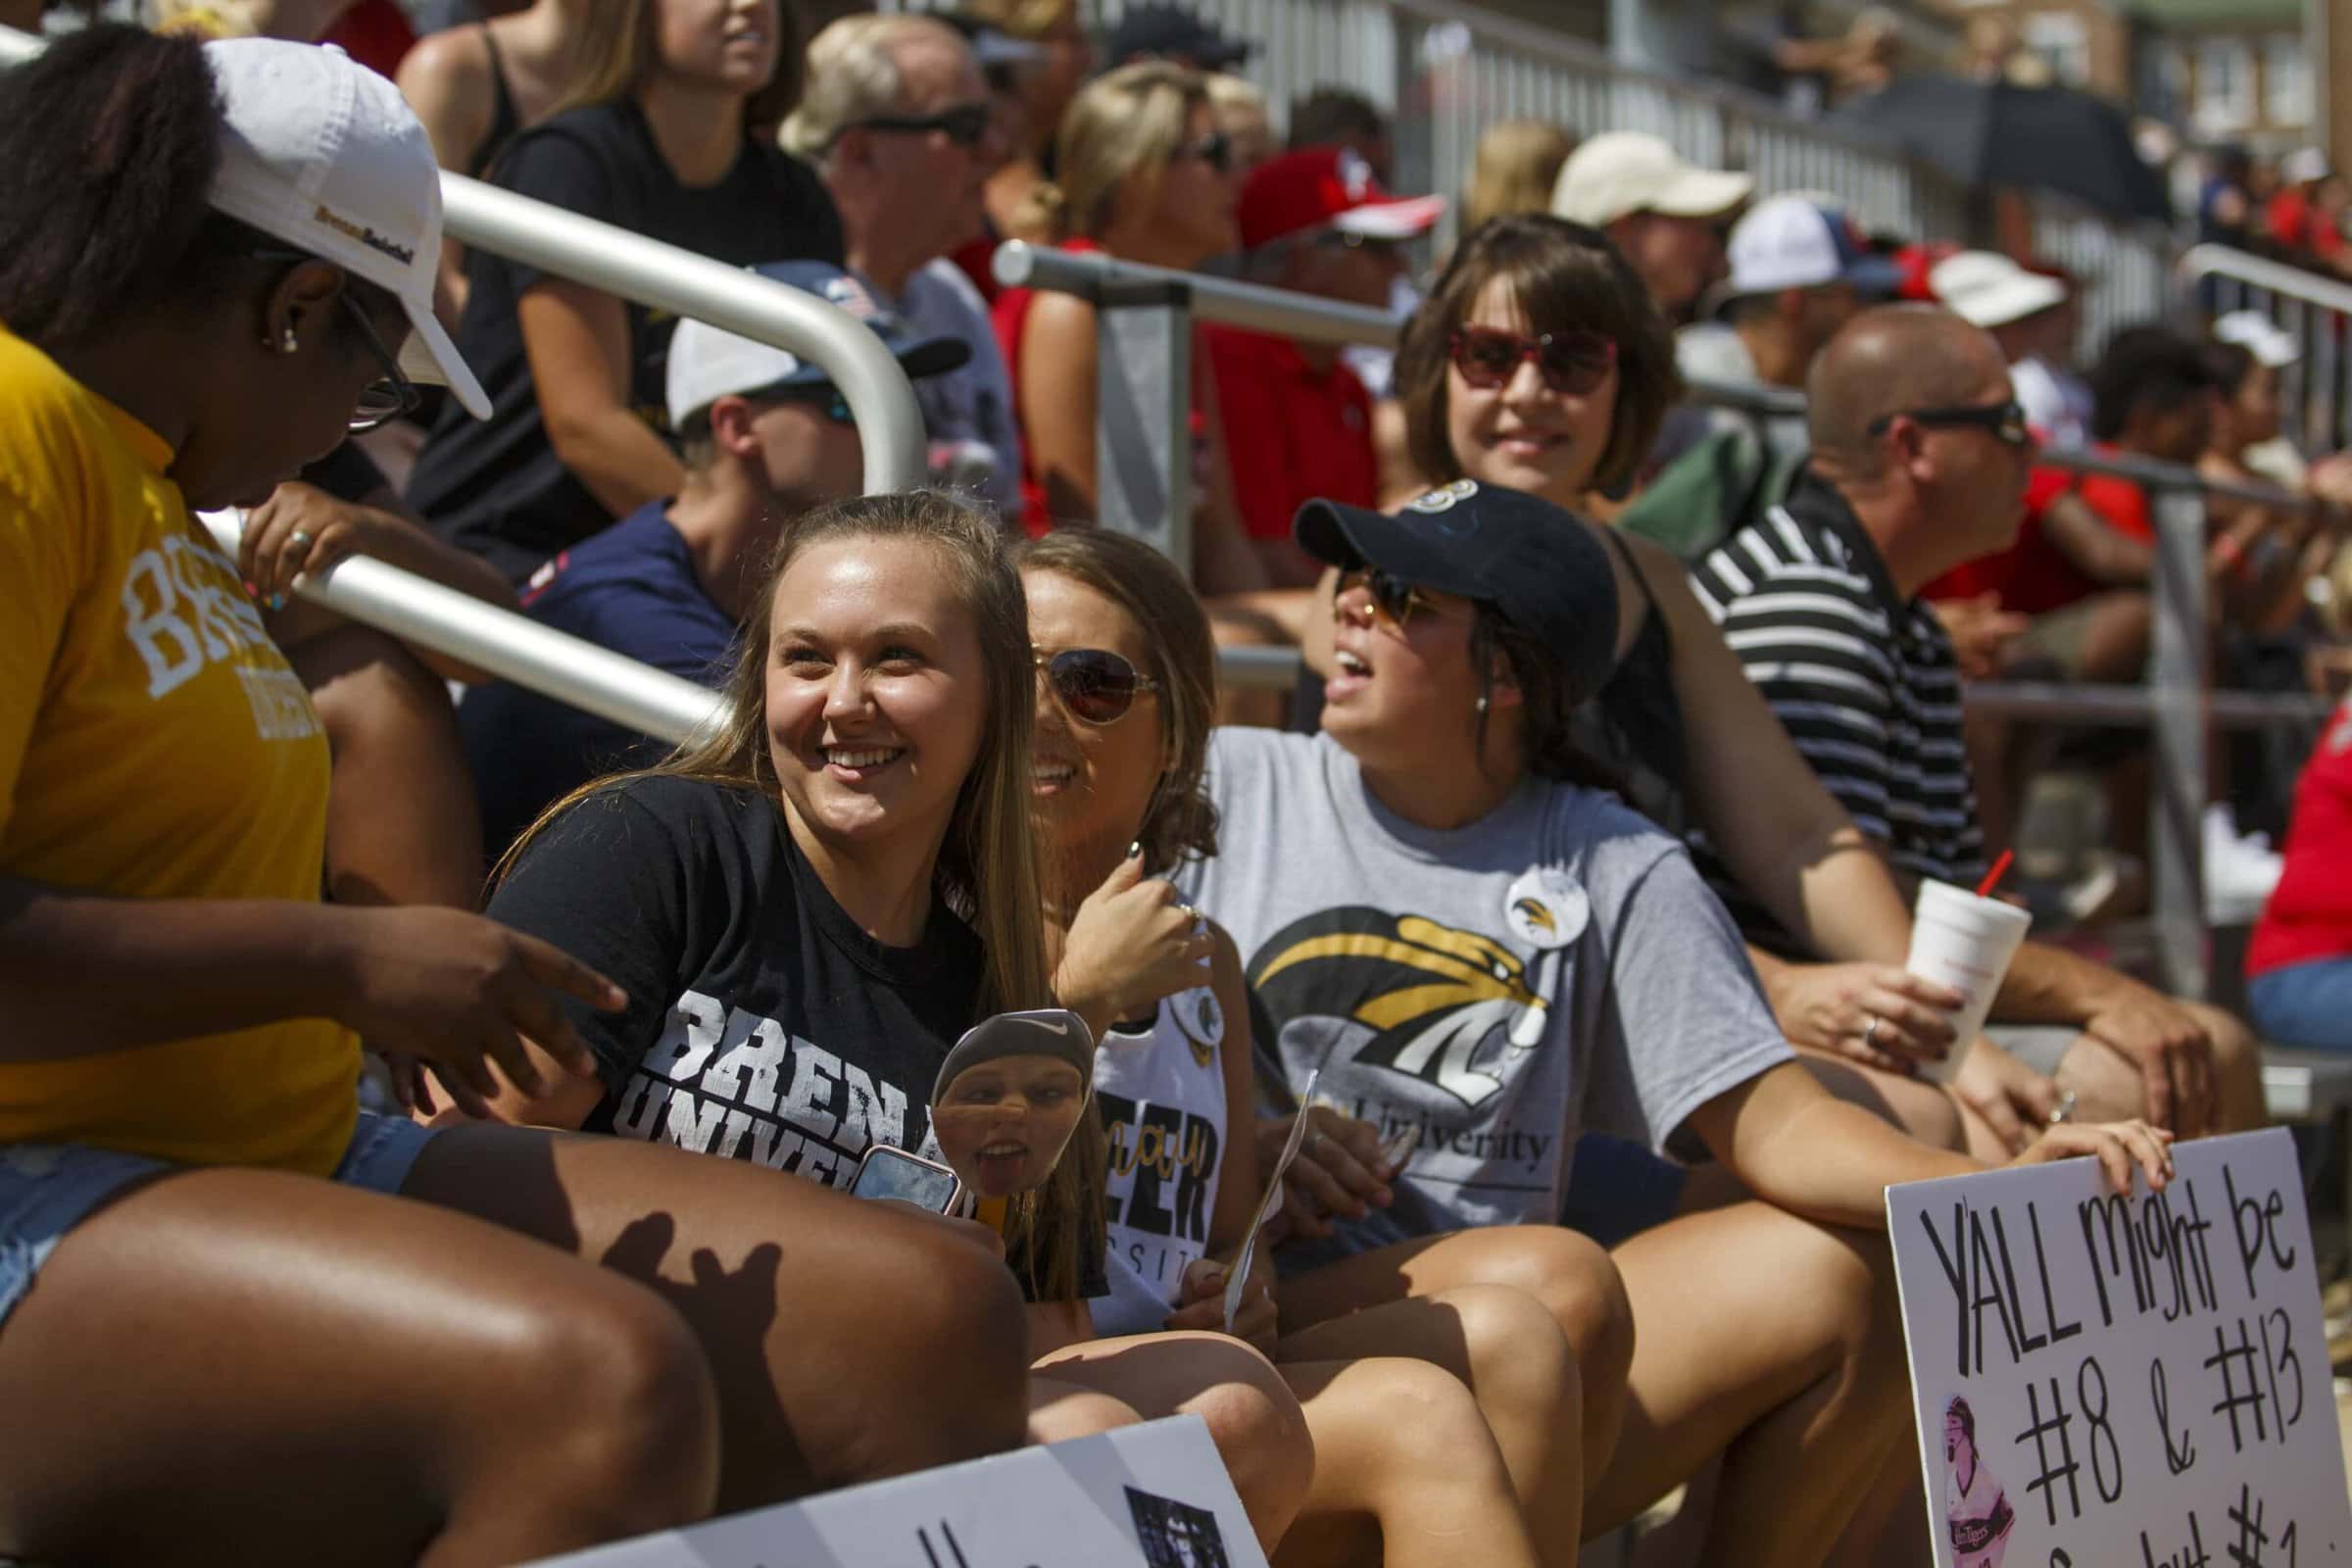 Brenau students enjoy the festivities as Brenau and the University of Georgia softball teams play an exhibition doubleheader at Pacolet Milliken Field at the Ernest Ledford Grindle Athletics Park on Saturday, Sept. 22, 2018. (AJ Reynolds/Brenau University)